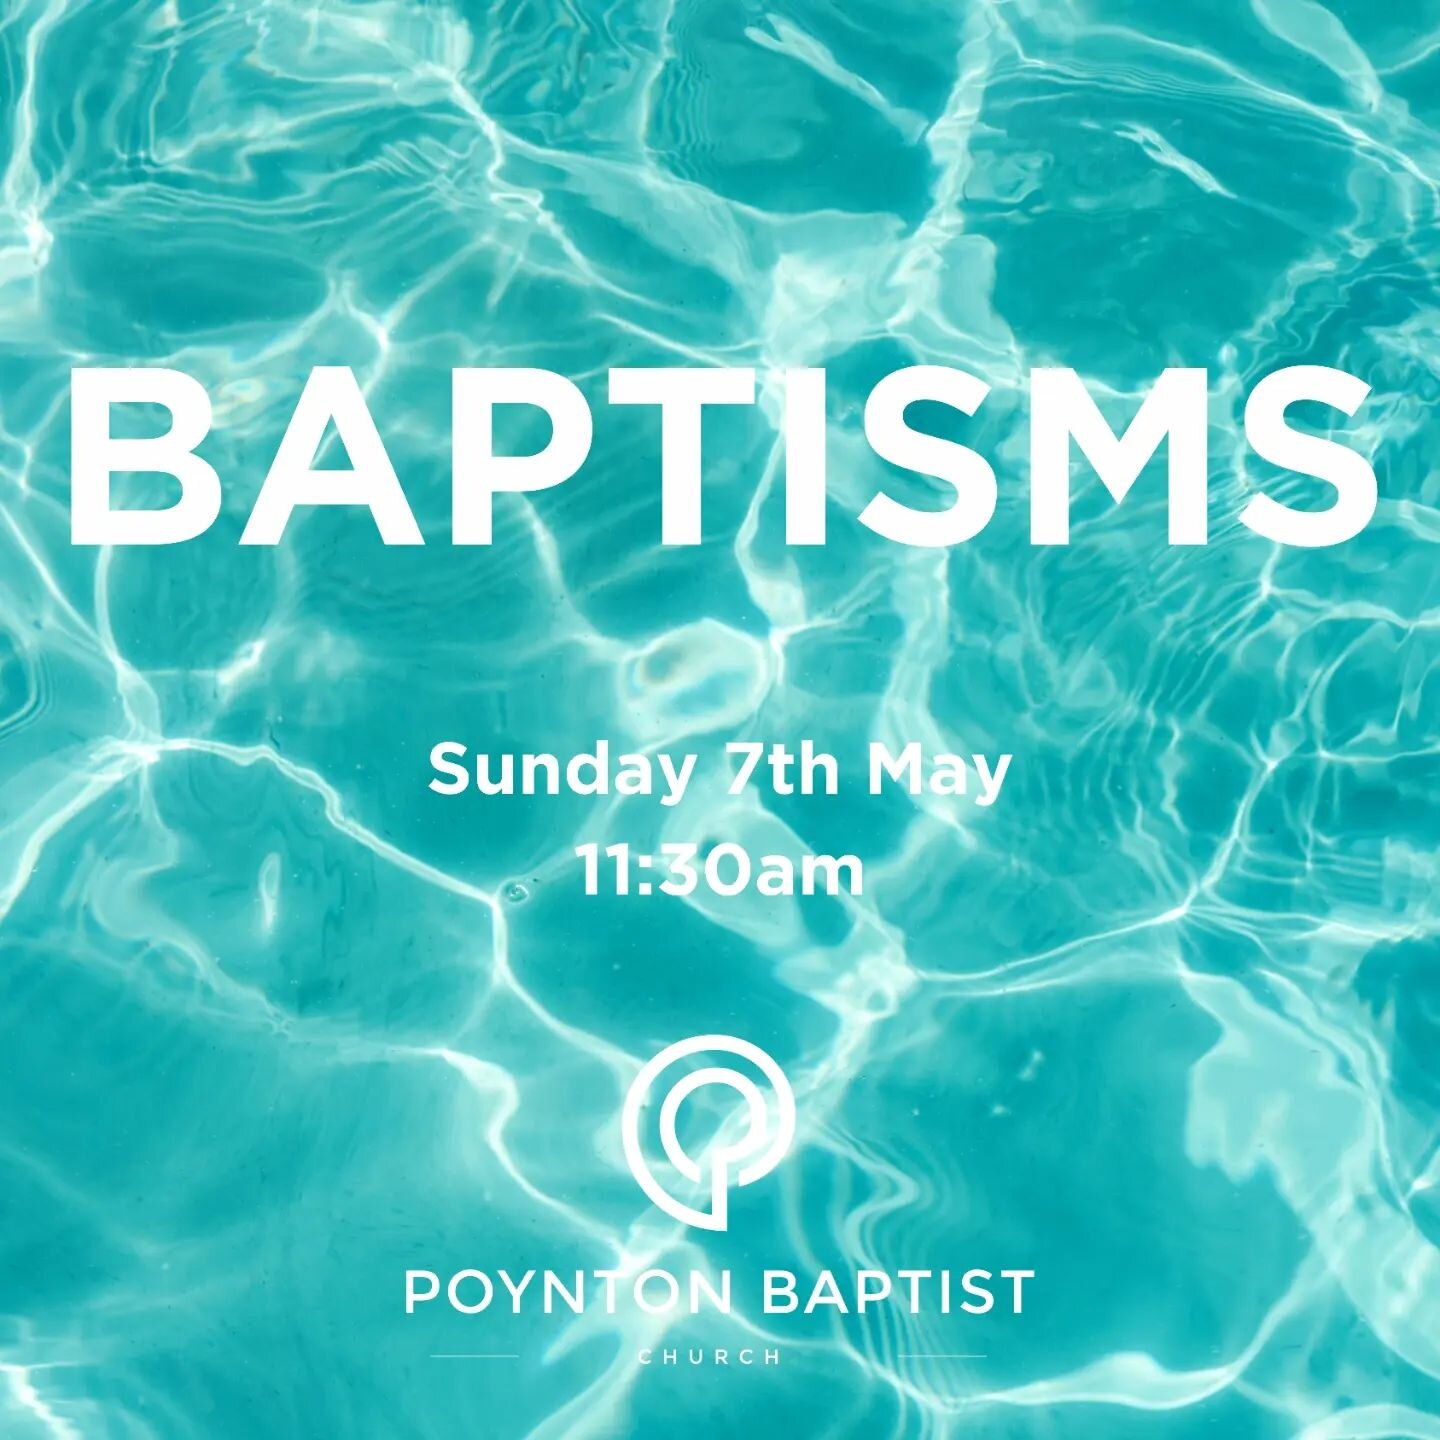 The plans for this Sunday's services have changed. They'll now be one Baptism service at 11:30am and no evening service.